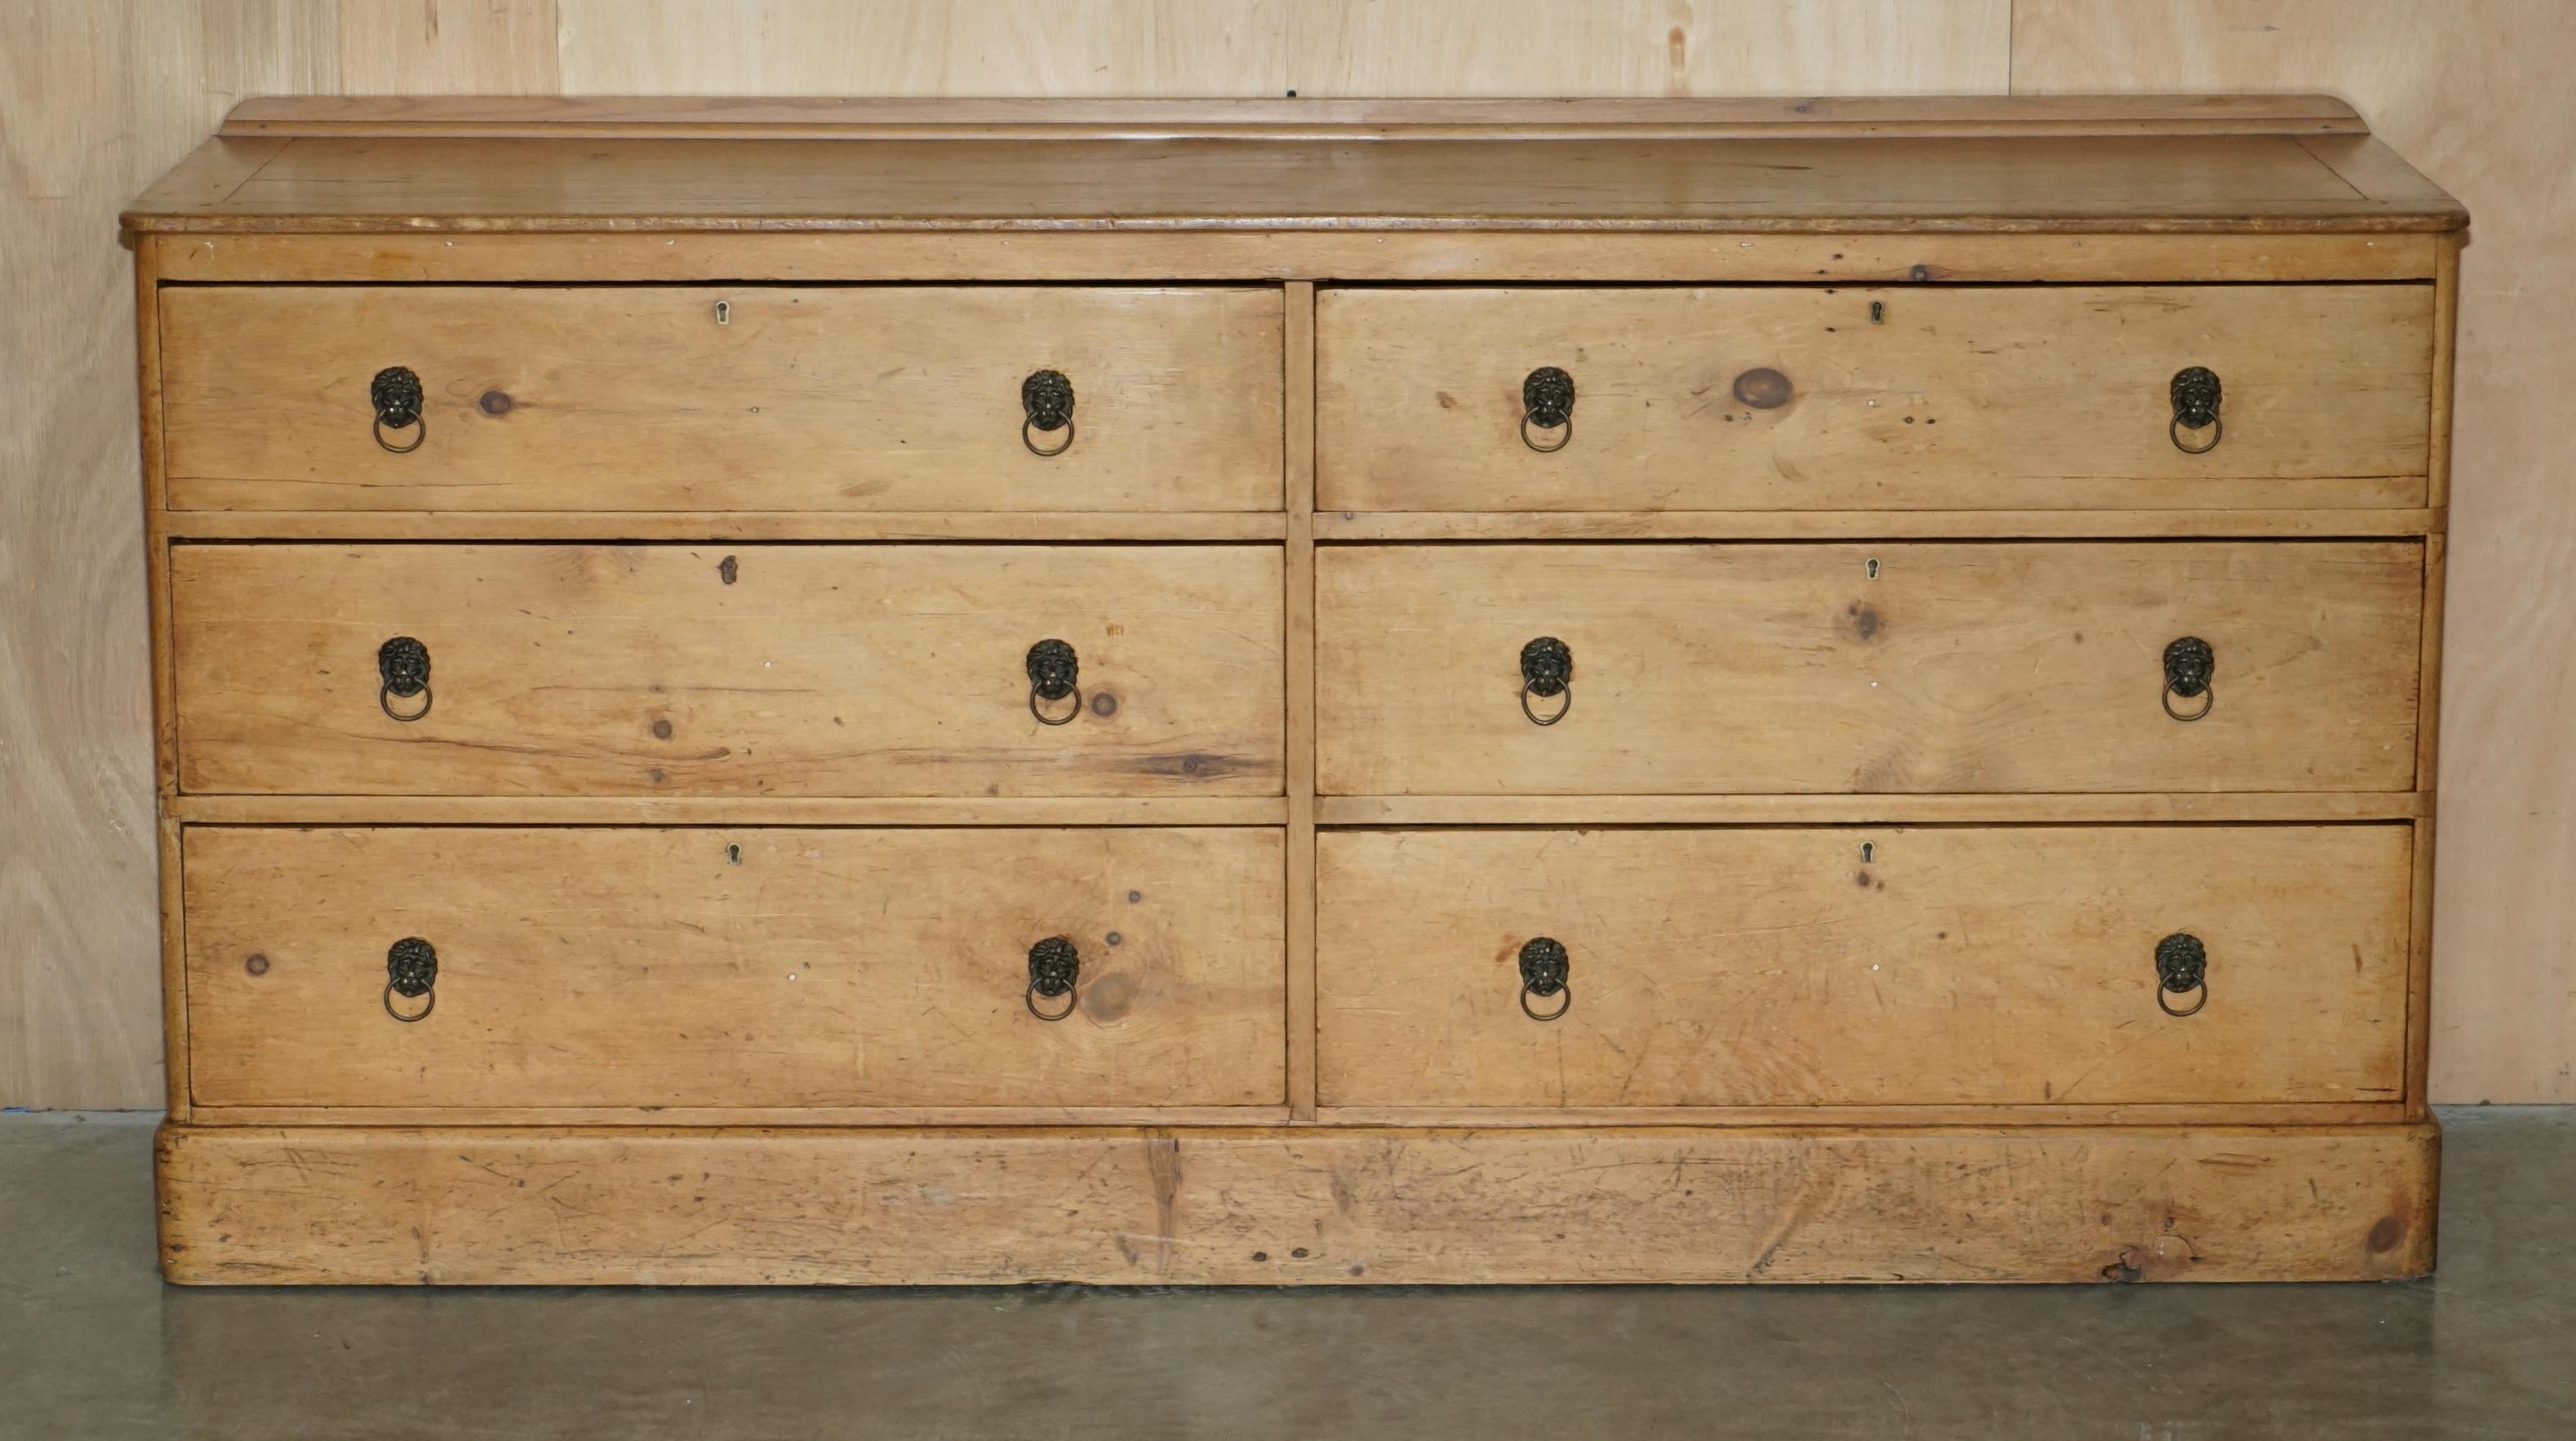 Royal House Antiques

Royal House Antiques is delighted to offer for sale this absolutely exquisite circa 1860 hand made in English Pine Haberdashery bank of drawers with Lions head handles 

Please note the delivery fee listed is just a guide, it